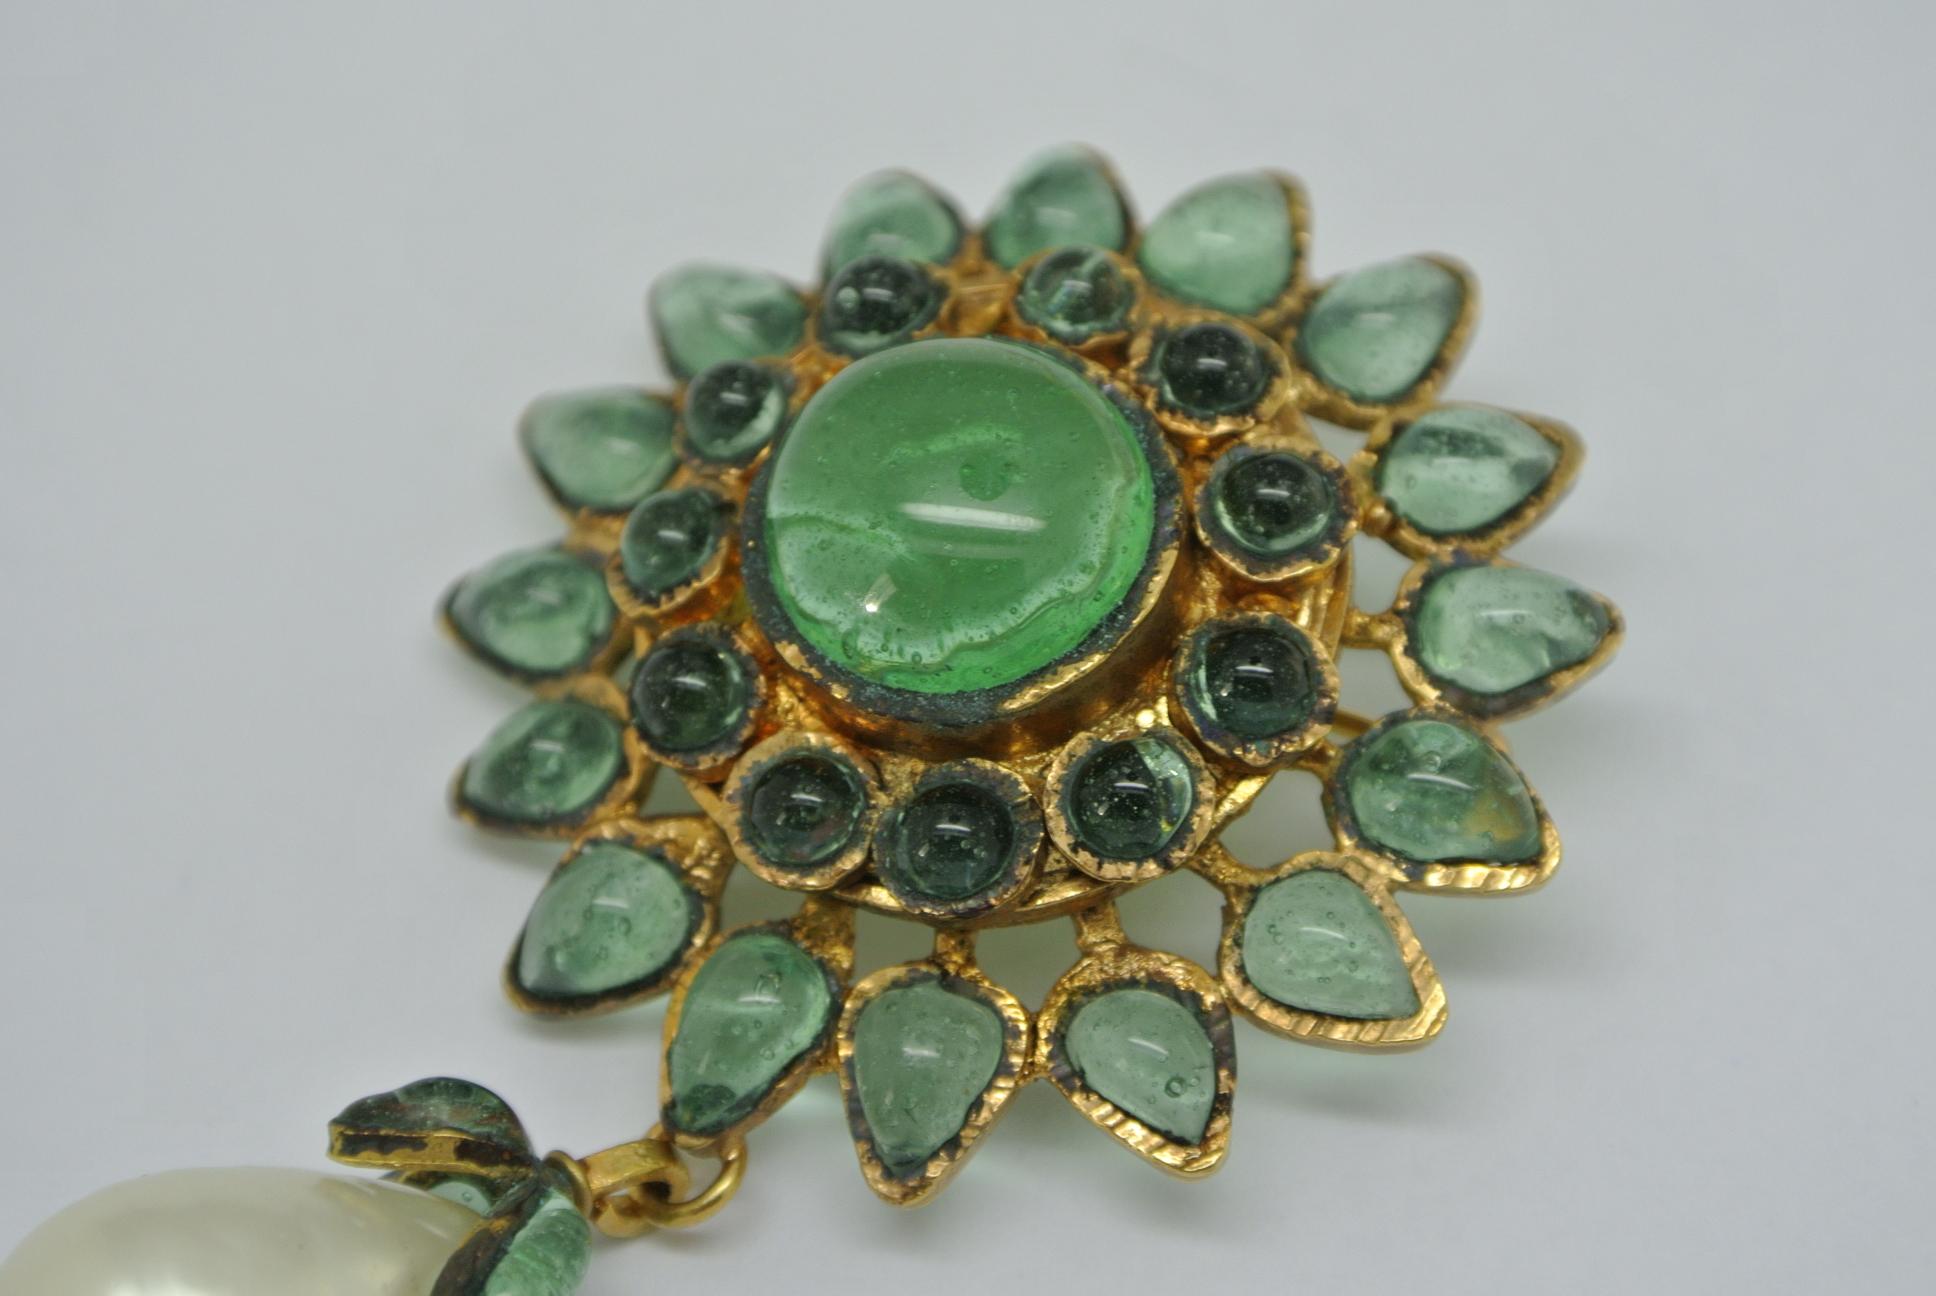 Sunburst design Chanel brooch
can be worn as pendant
Comes with green poured glass,
made by Gripoix workshop.


